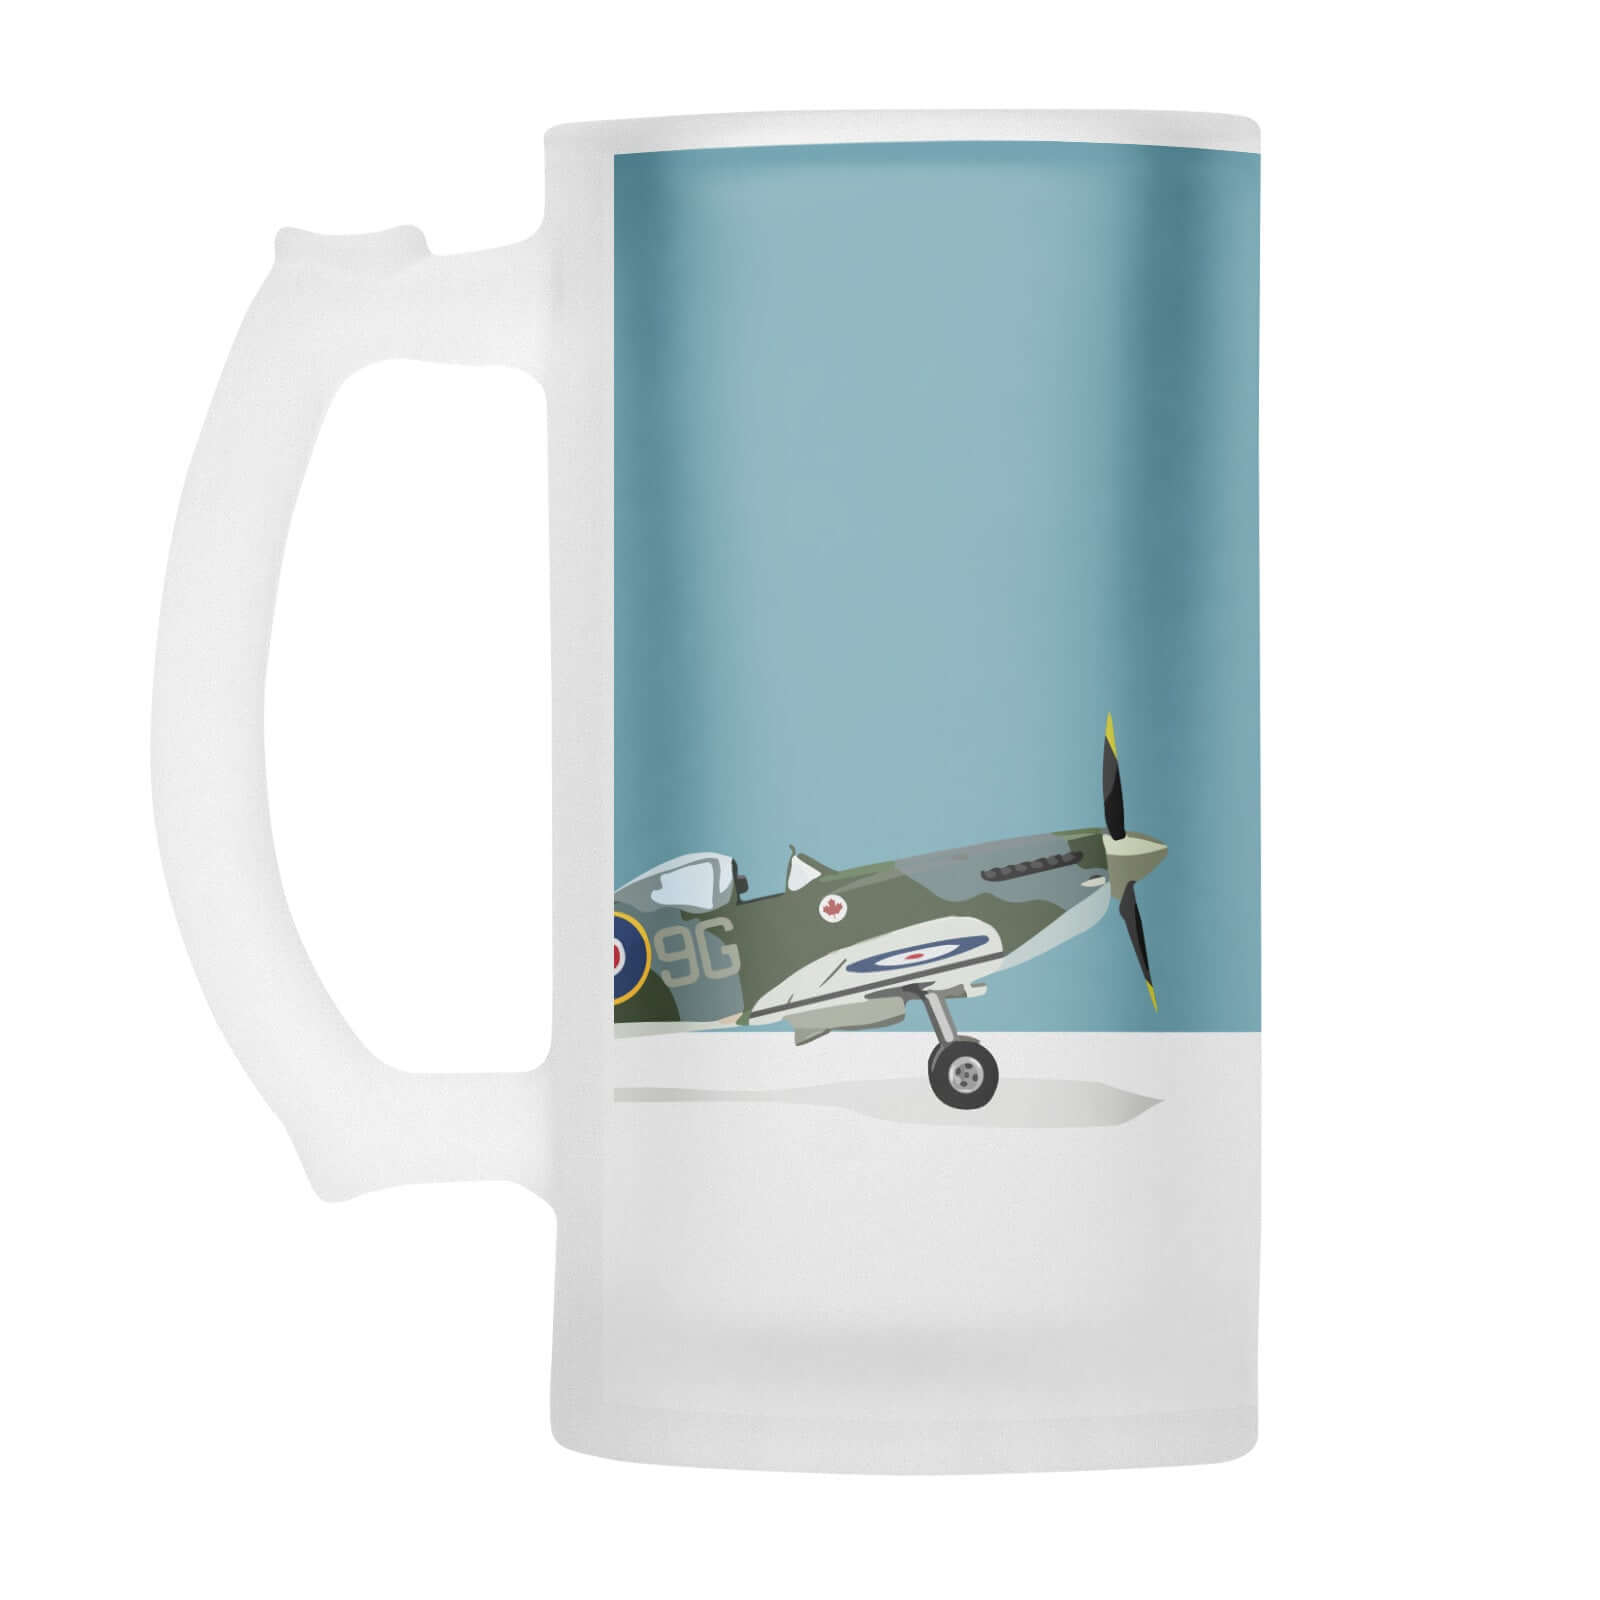 World War Two  (WW2) Spitfire fighter plane on a blue colour block printed onto a frosted glass beer stein from Mustard and Gray